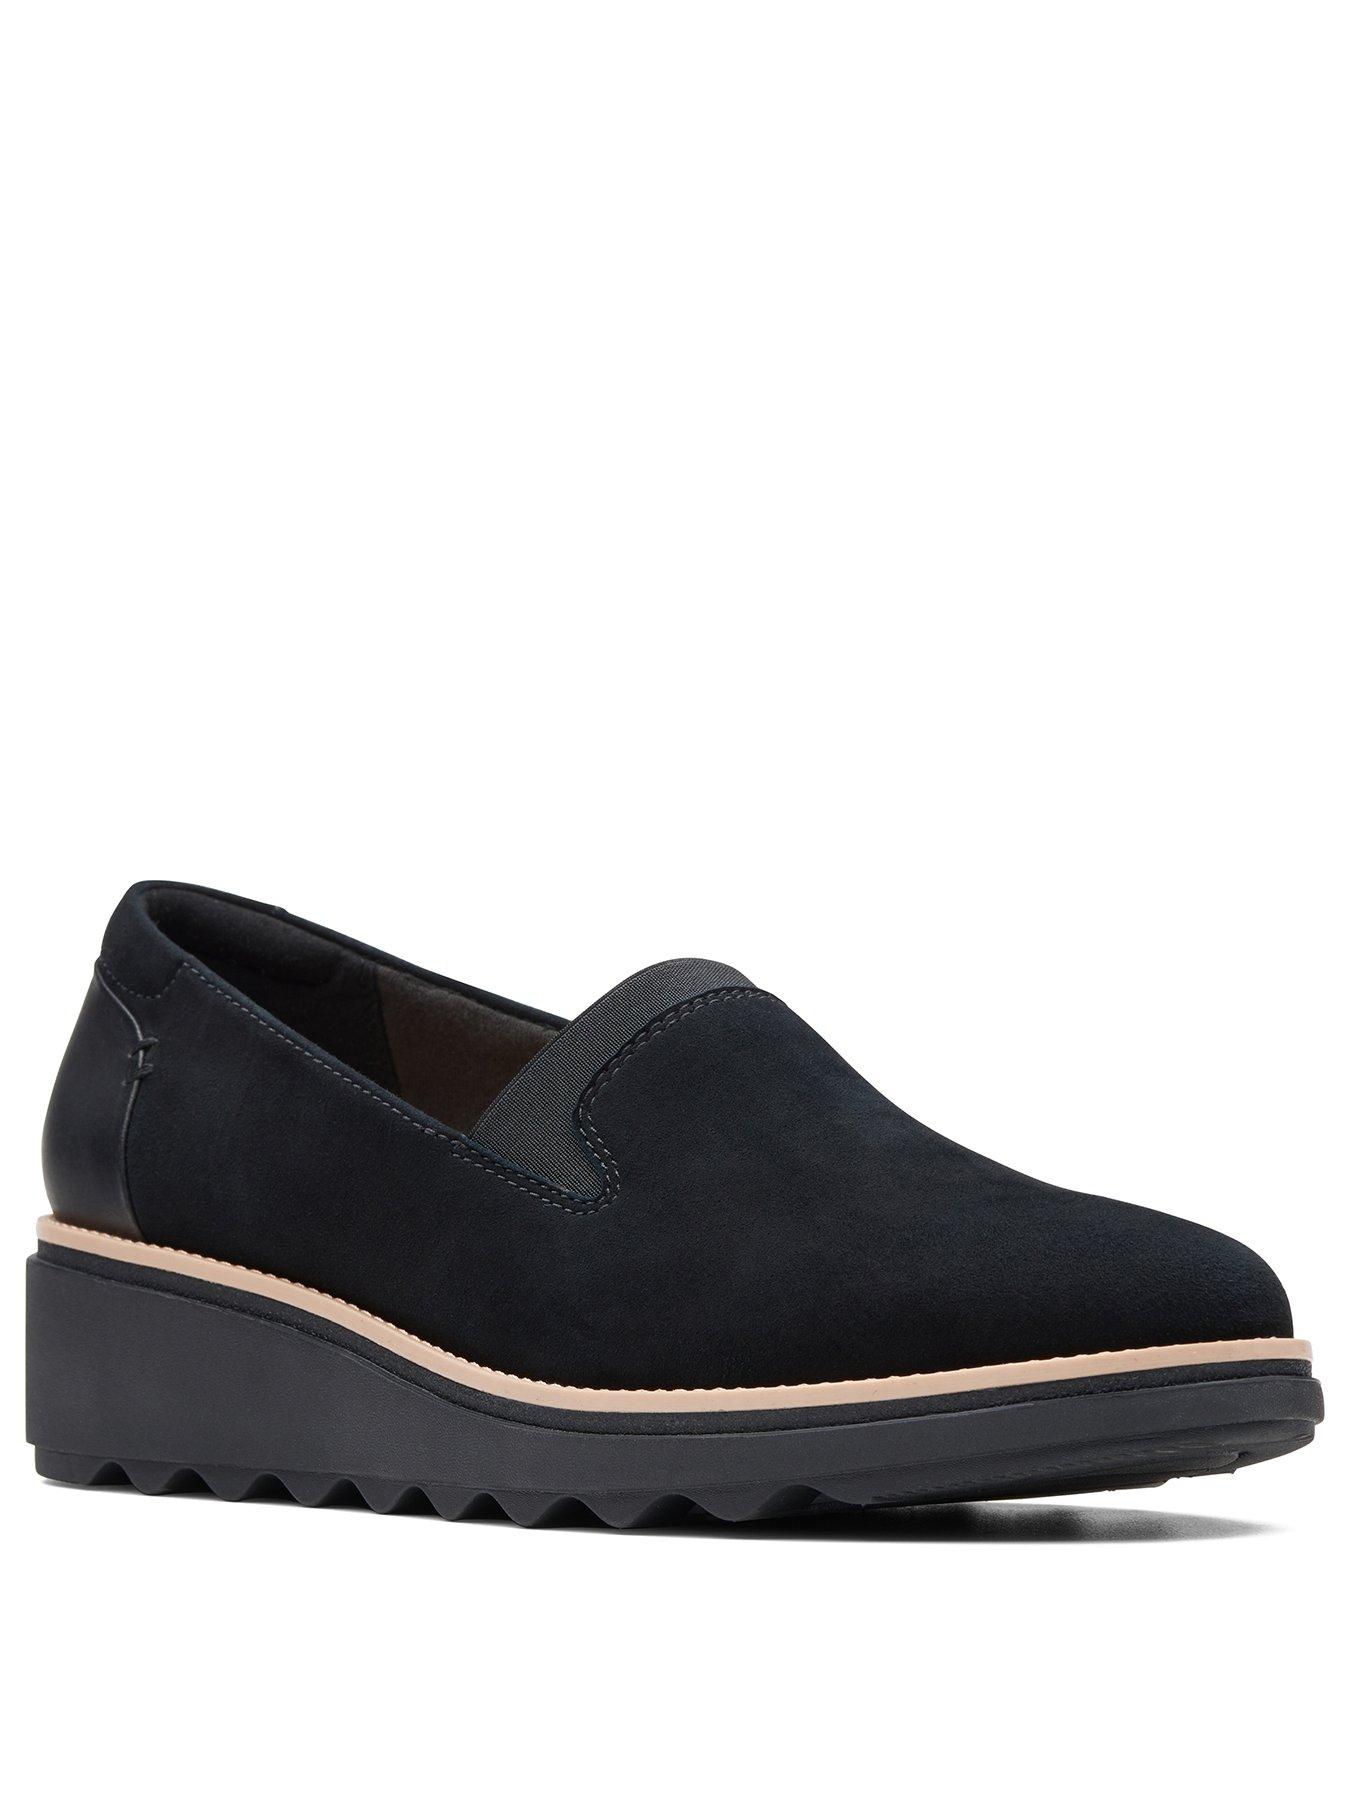 clarks wide fitting shoes ireland